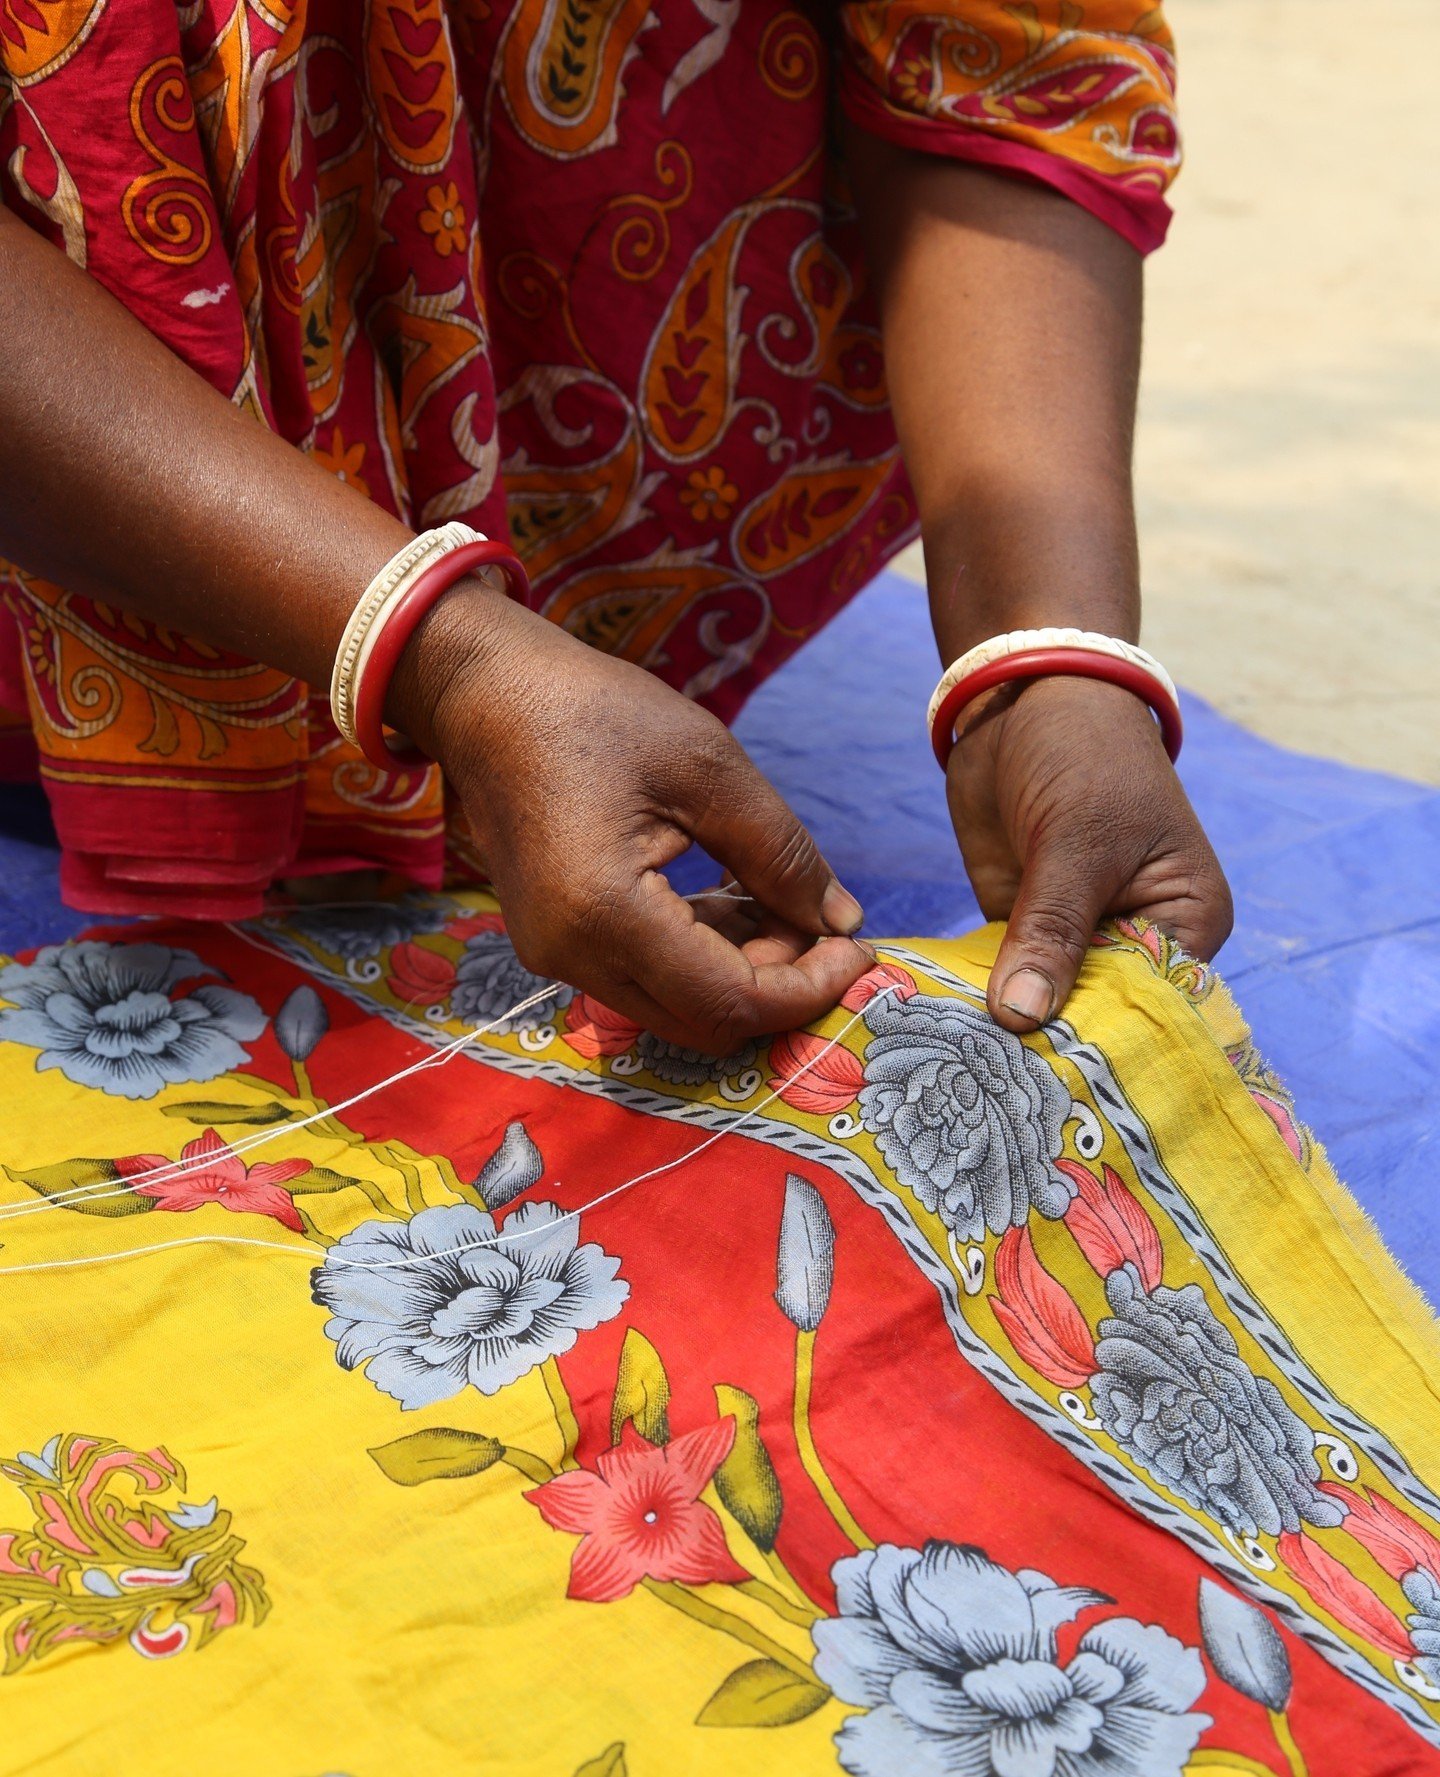 Can you believe it's almost May? Prepare for summertime by shopping with Asha Project! We've got all those bright summertime colors.⁠
⁠
⁠
✨Click linkin.bio to shop✨⁠
.⁠
.⁠
.⁠
.⁠
.⁠
.⁠
.⁠
⁠
#fairtrade⁠
#fairtradeproducts⁠
#handmade⁠
#India⁠
#dogood⁠
#